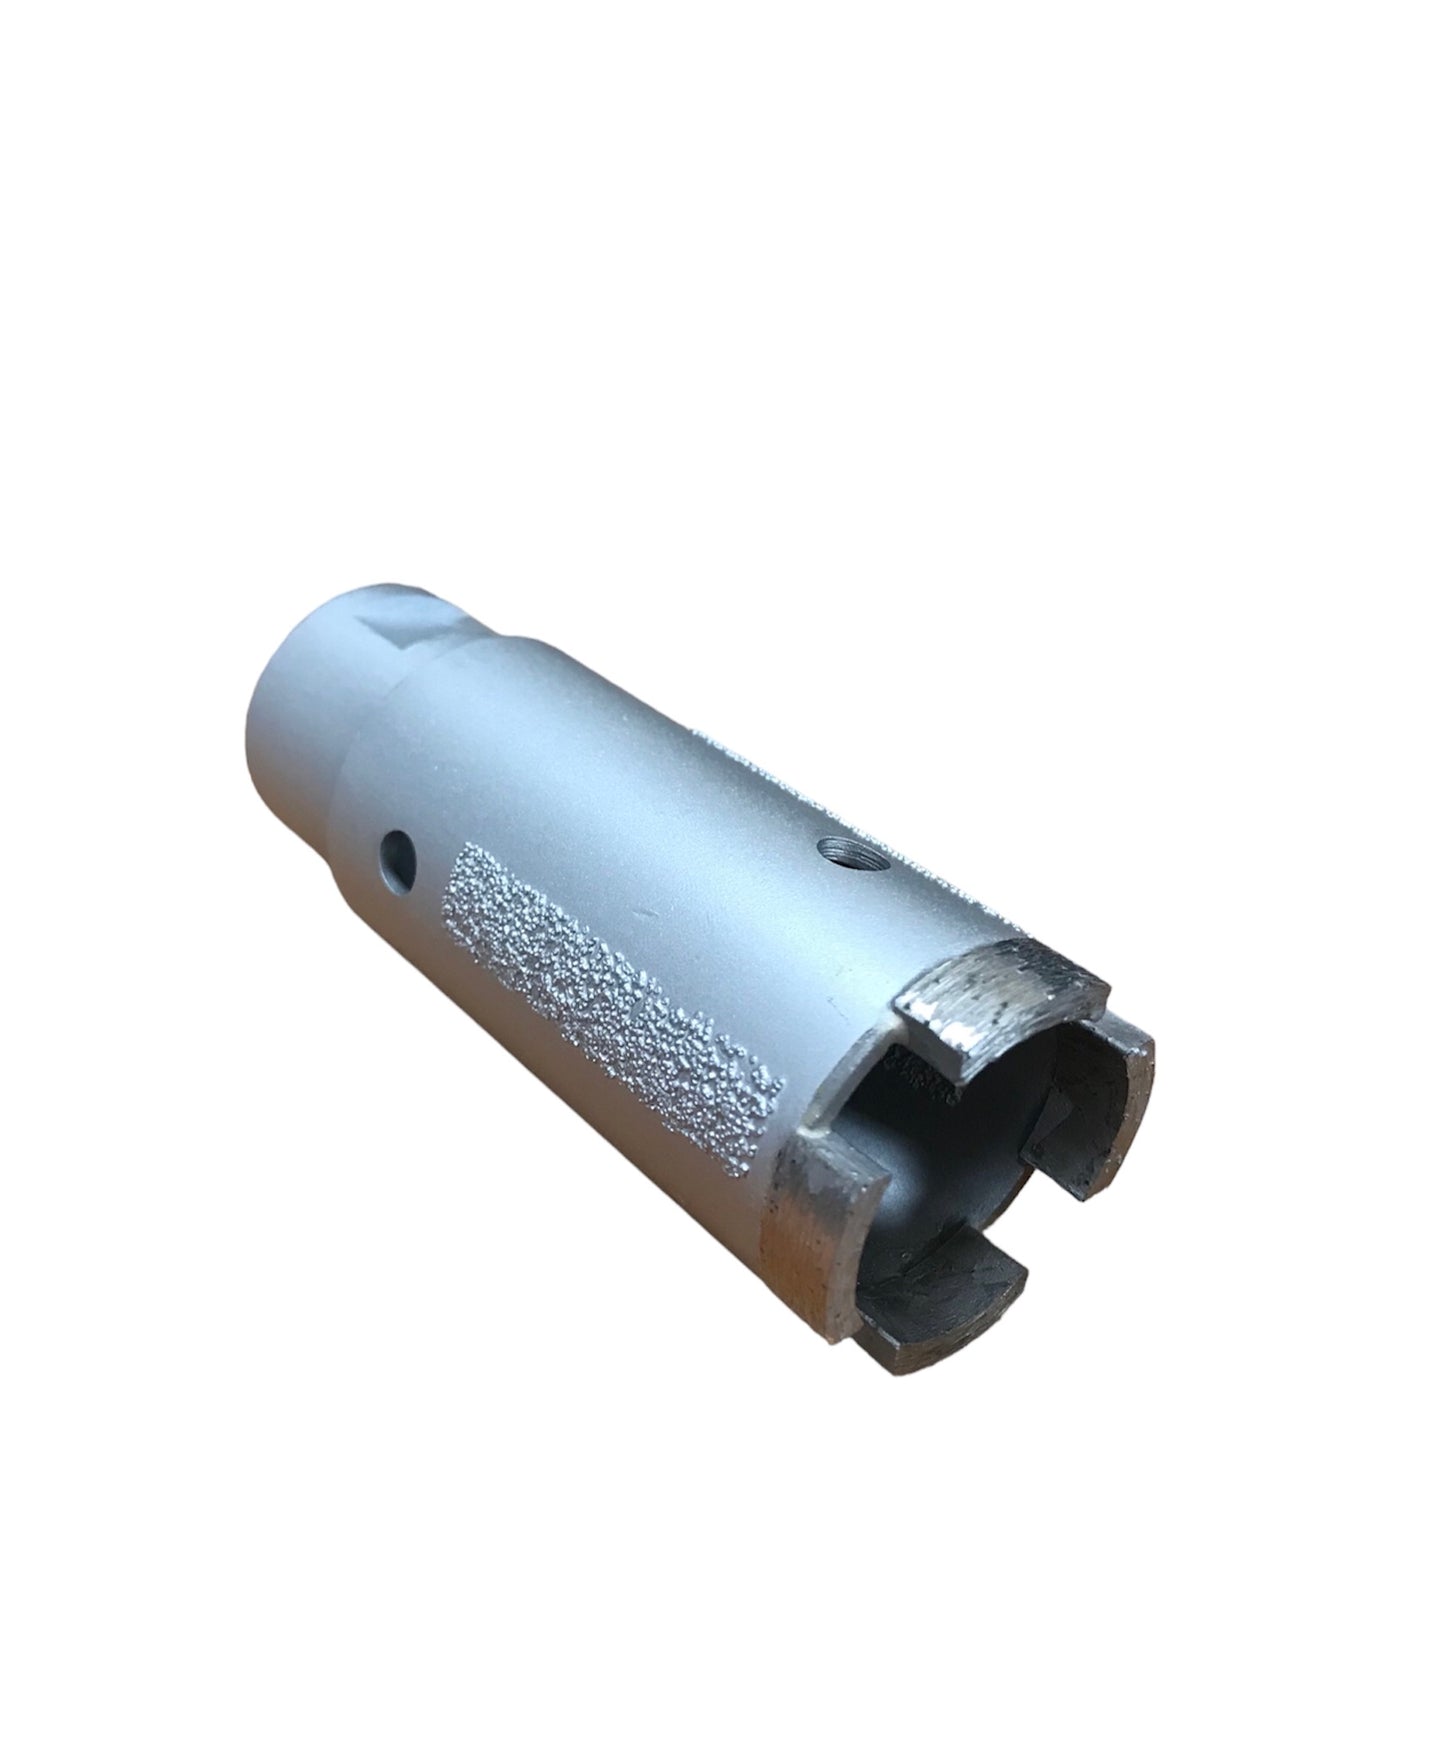 Core Drill Bit With Protection 1-3/8", 35mm